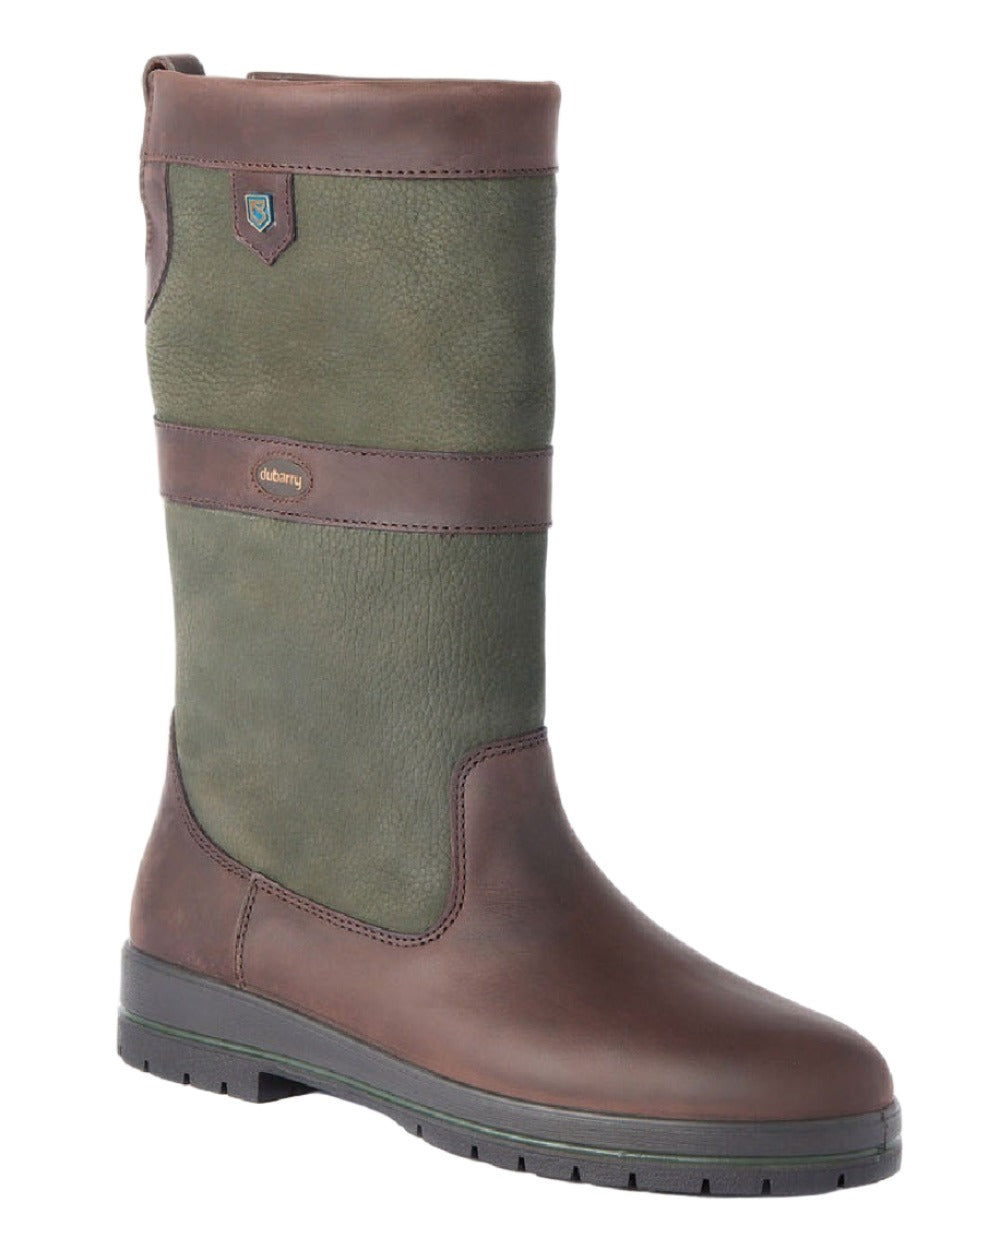 Ivy coloured Dubarry Kildare Country Boots on white background 